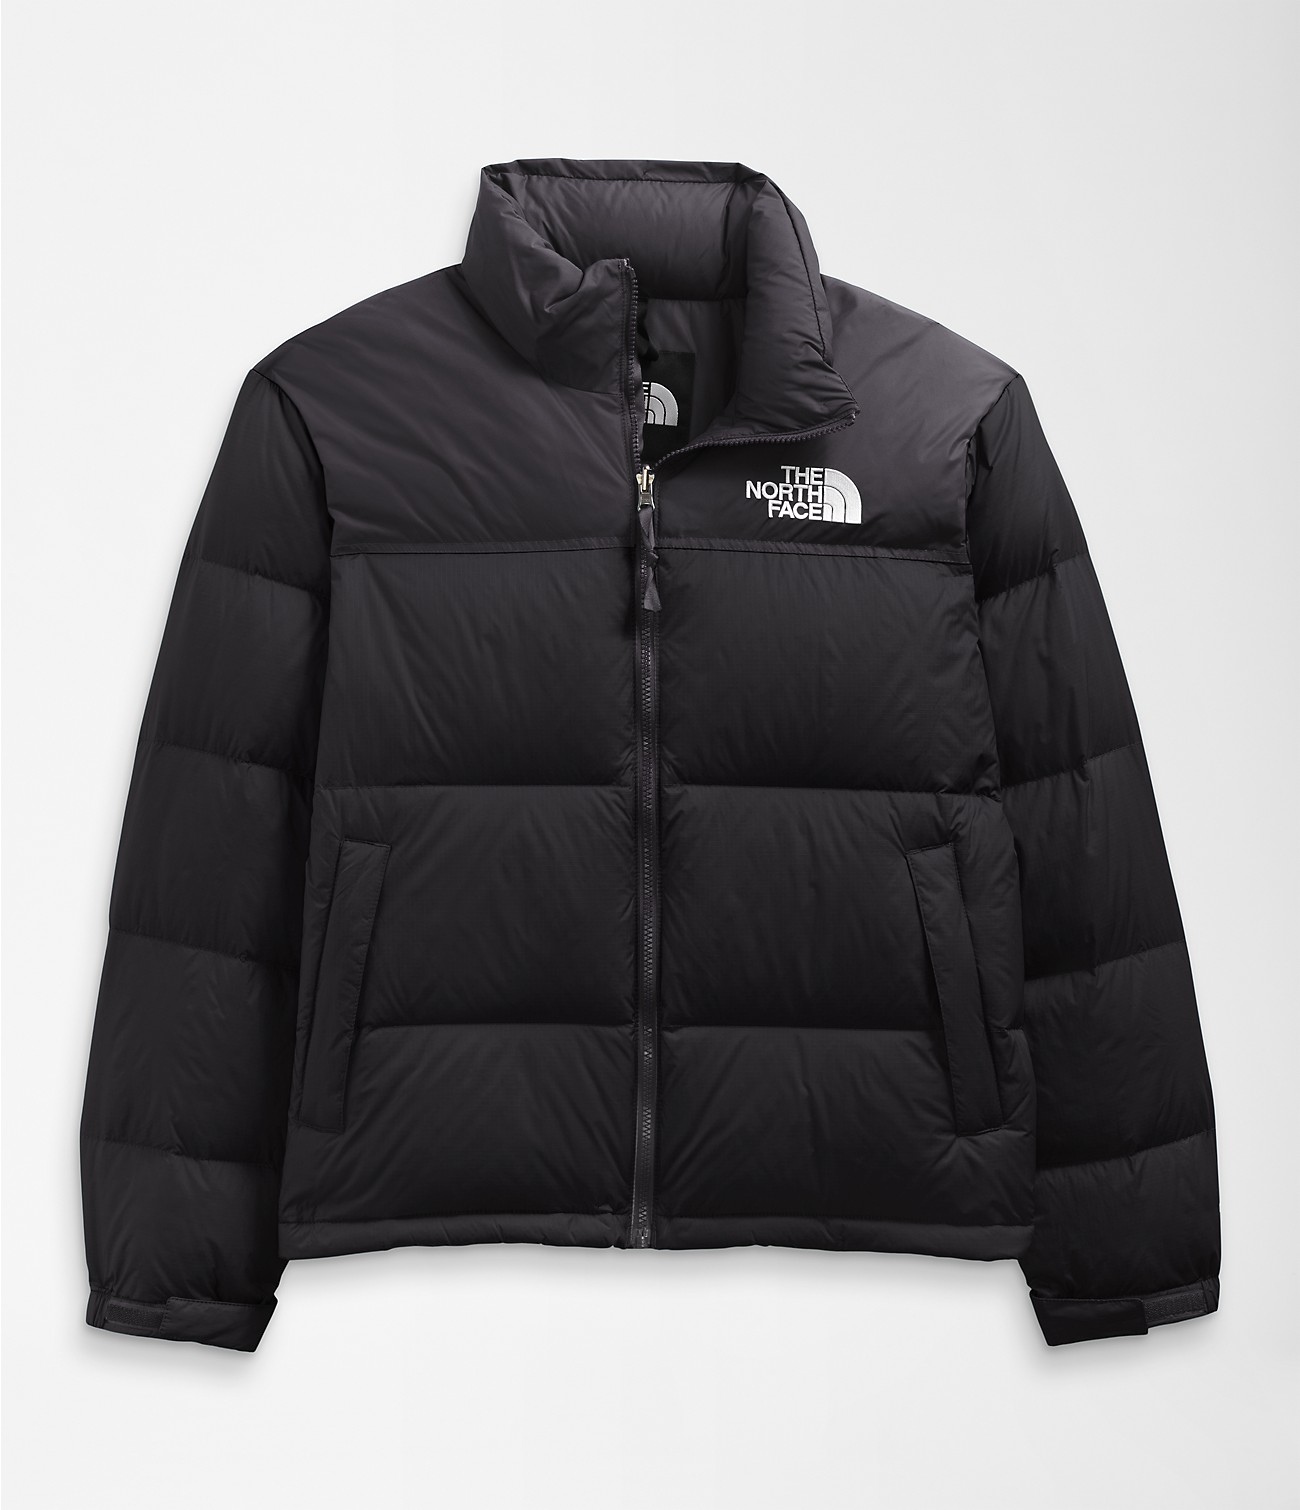 Unlock Wilderness' choice in the Karrimor Vs North Face comparison, the 1996 Retro Nuptse Jacket by The North Face